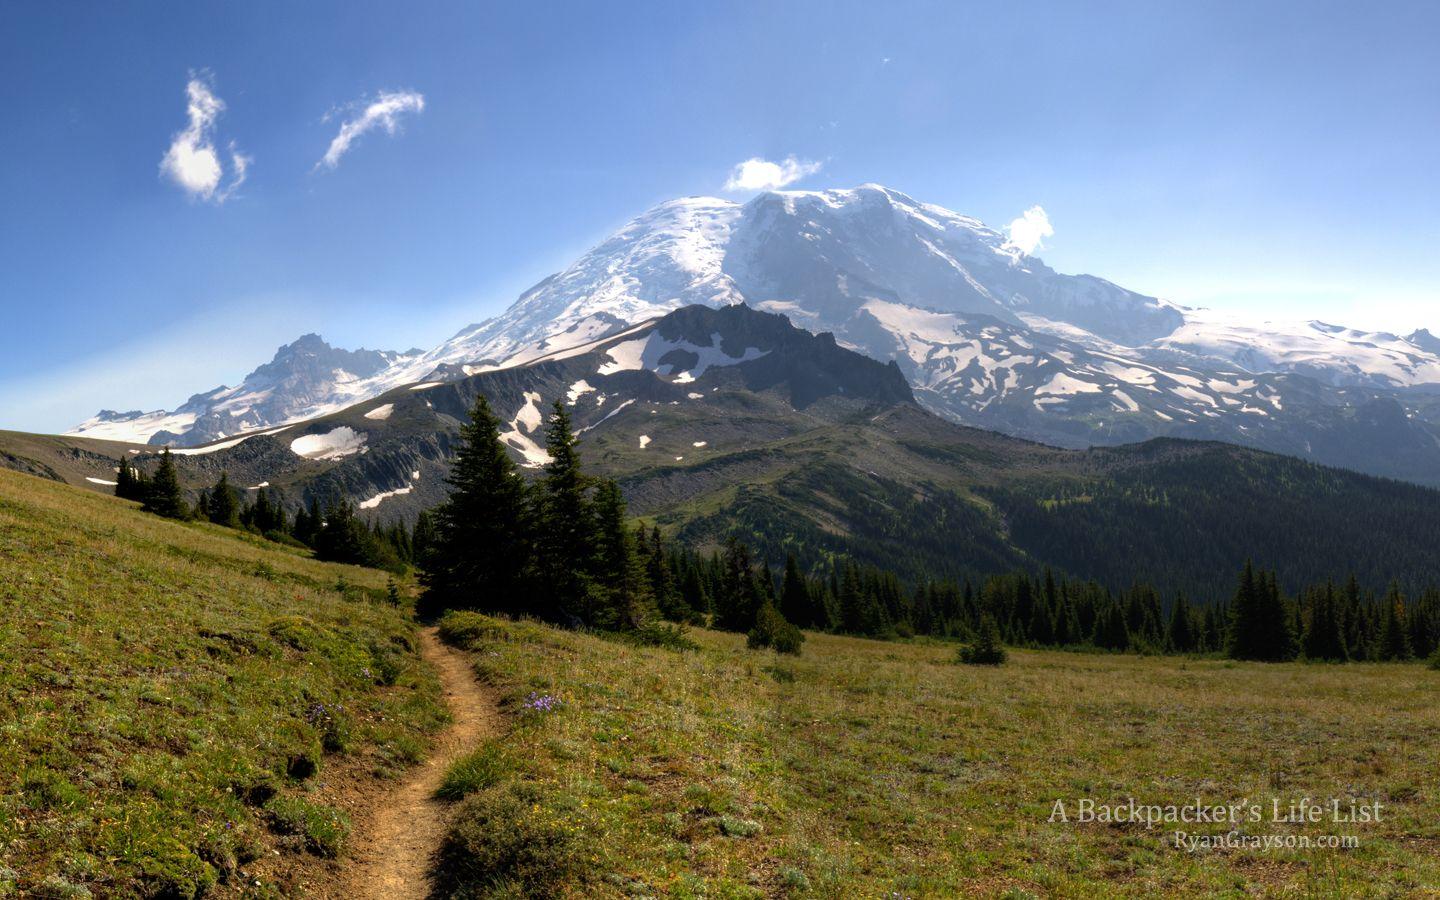 A Backpacker's Life: Photography: Mount Rainier from the Wonderland